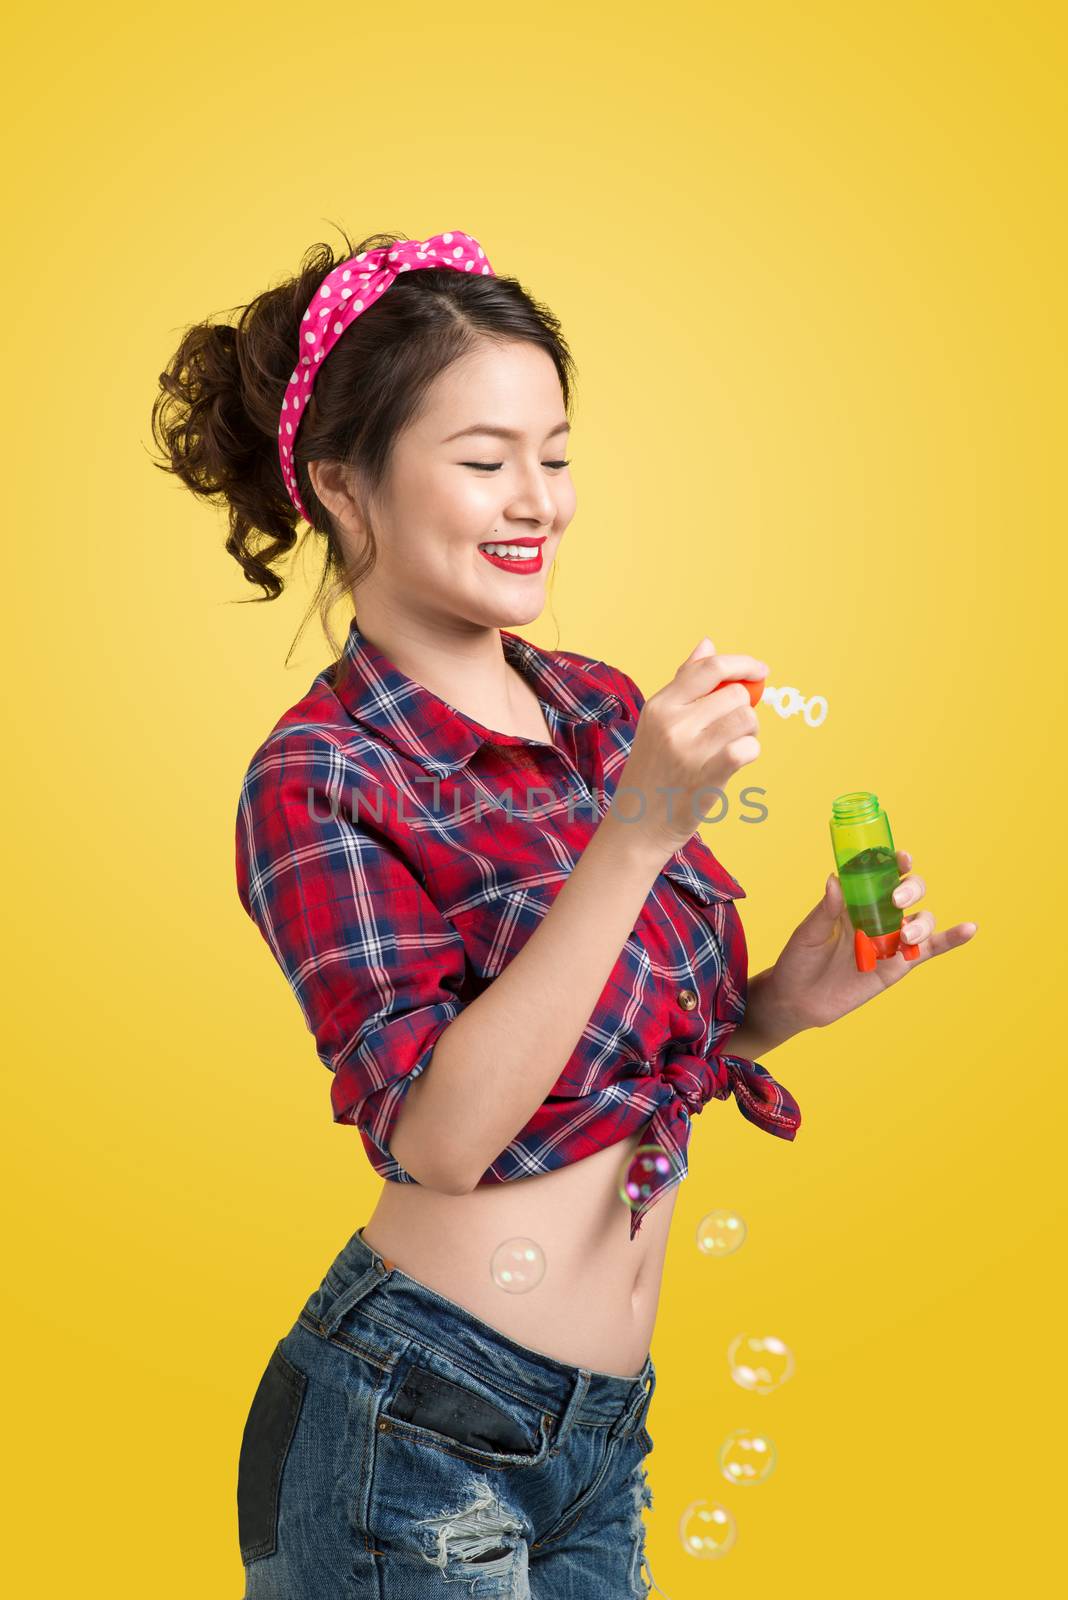 Pinup model blowing soap bubbles over yellow background.